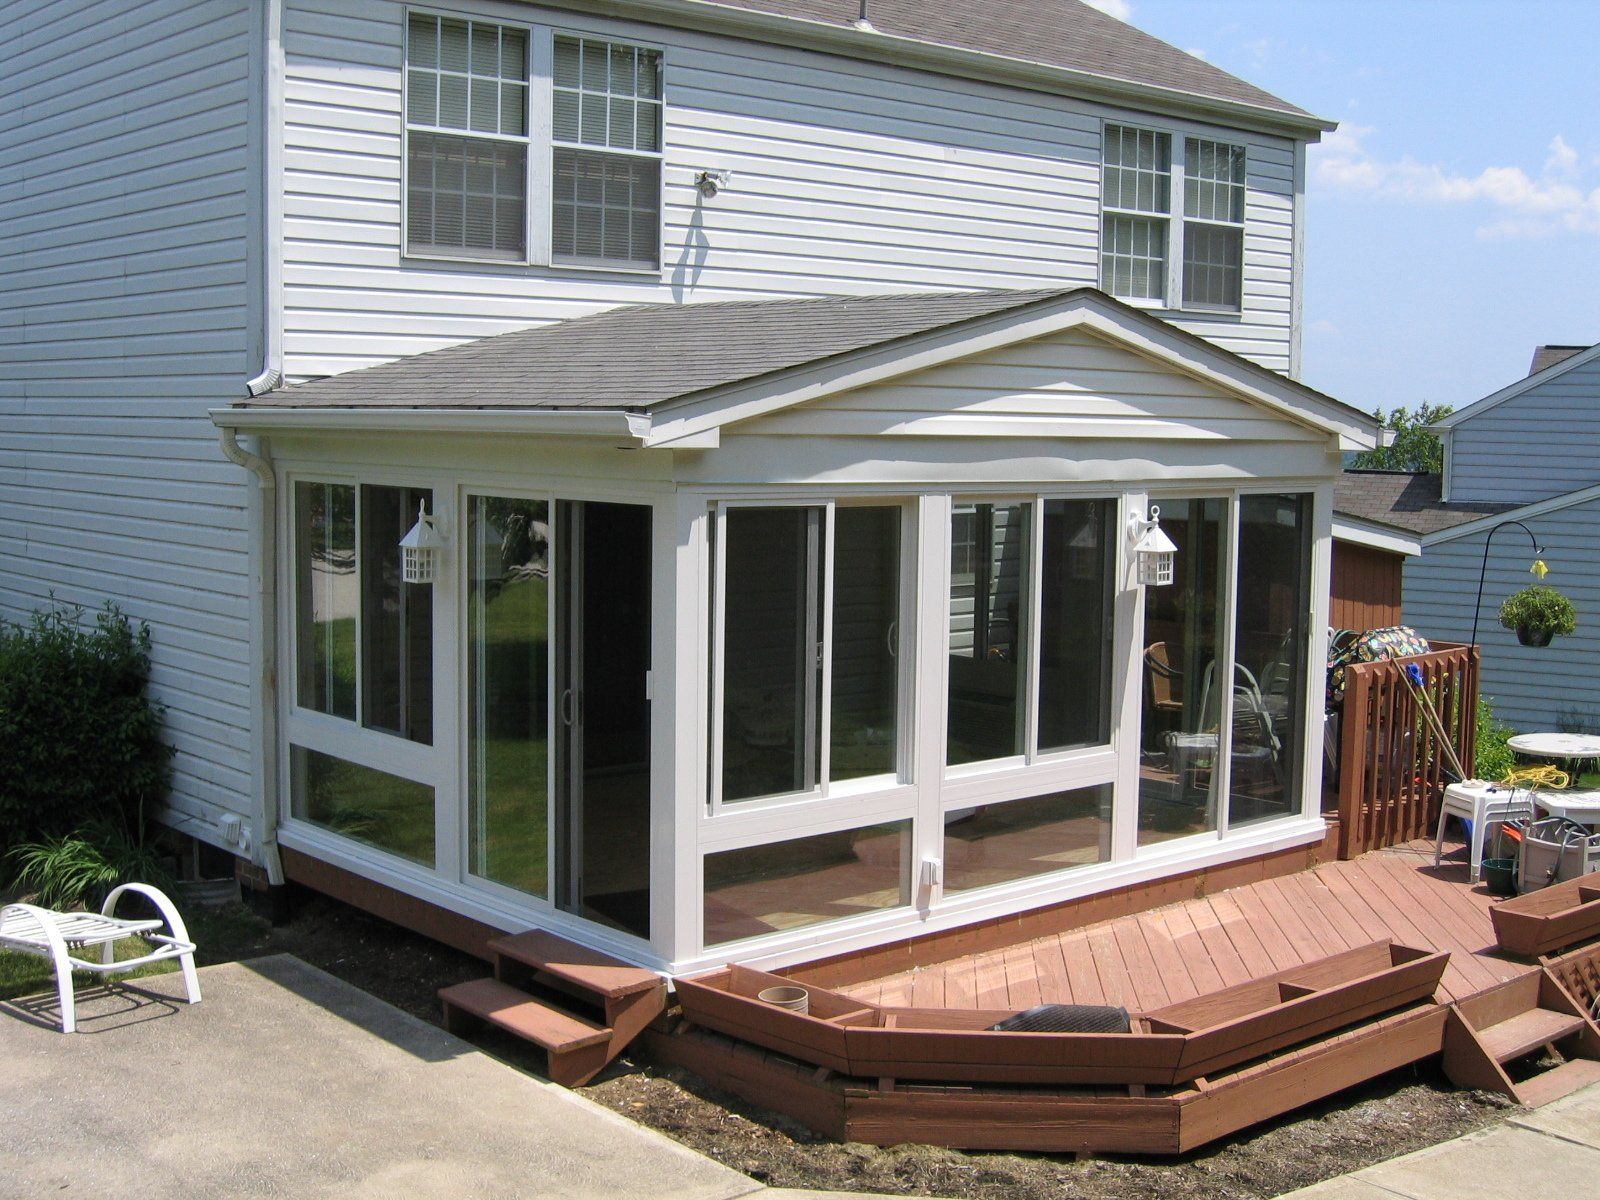 after picture of completed four season sunroom build